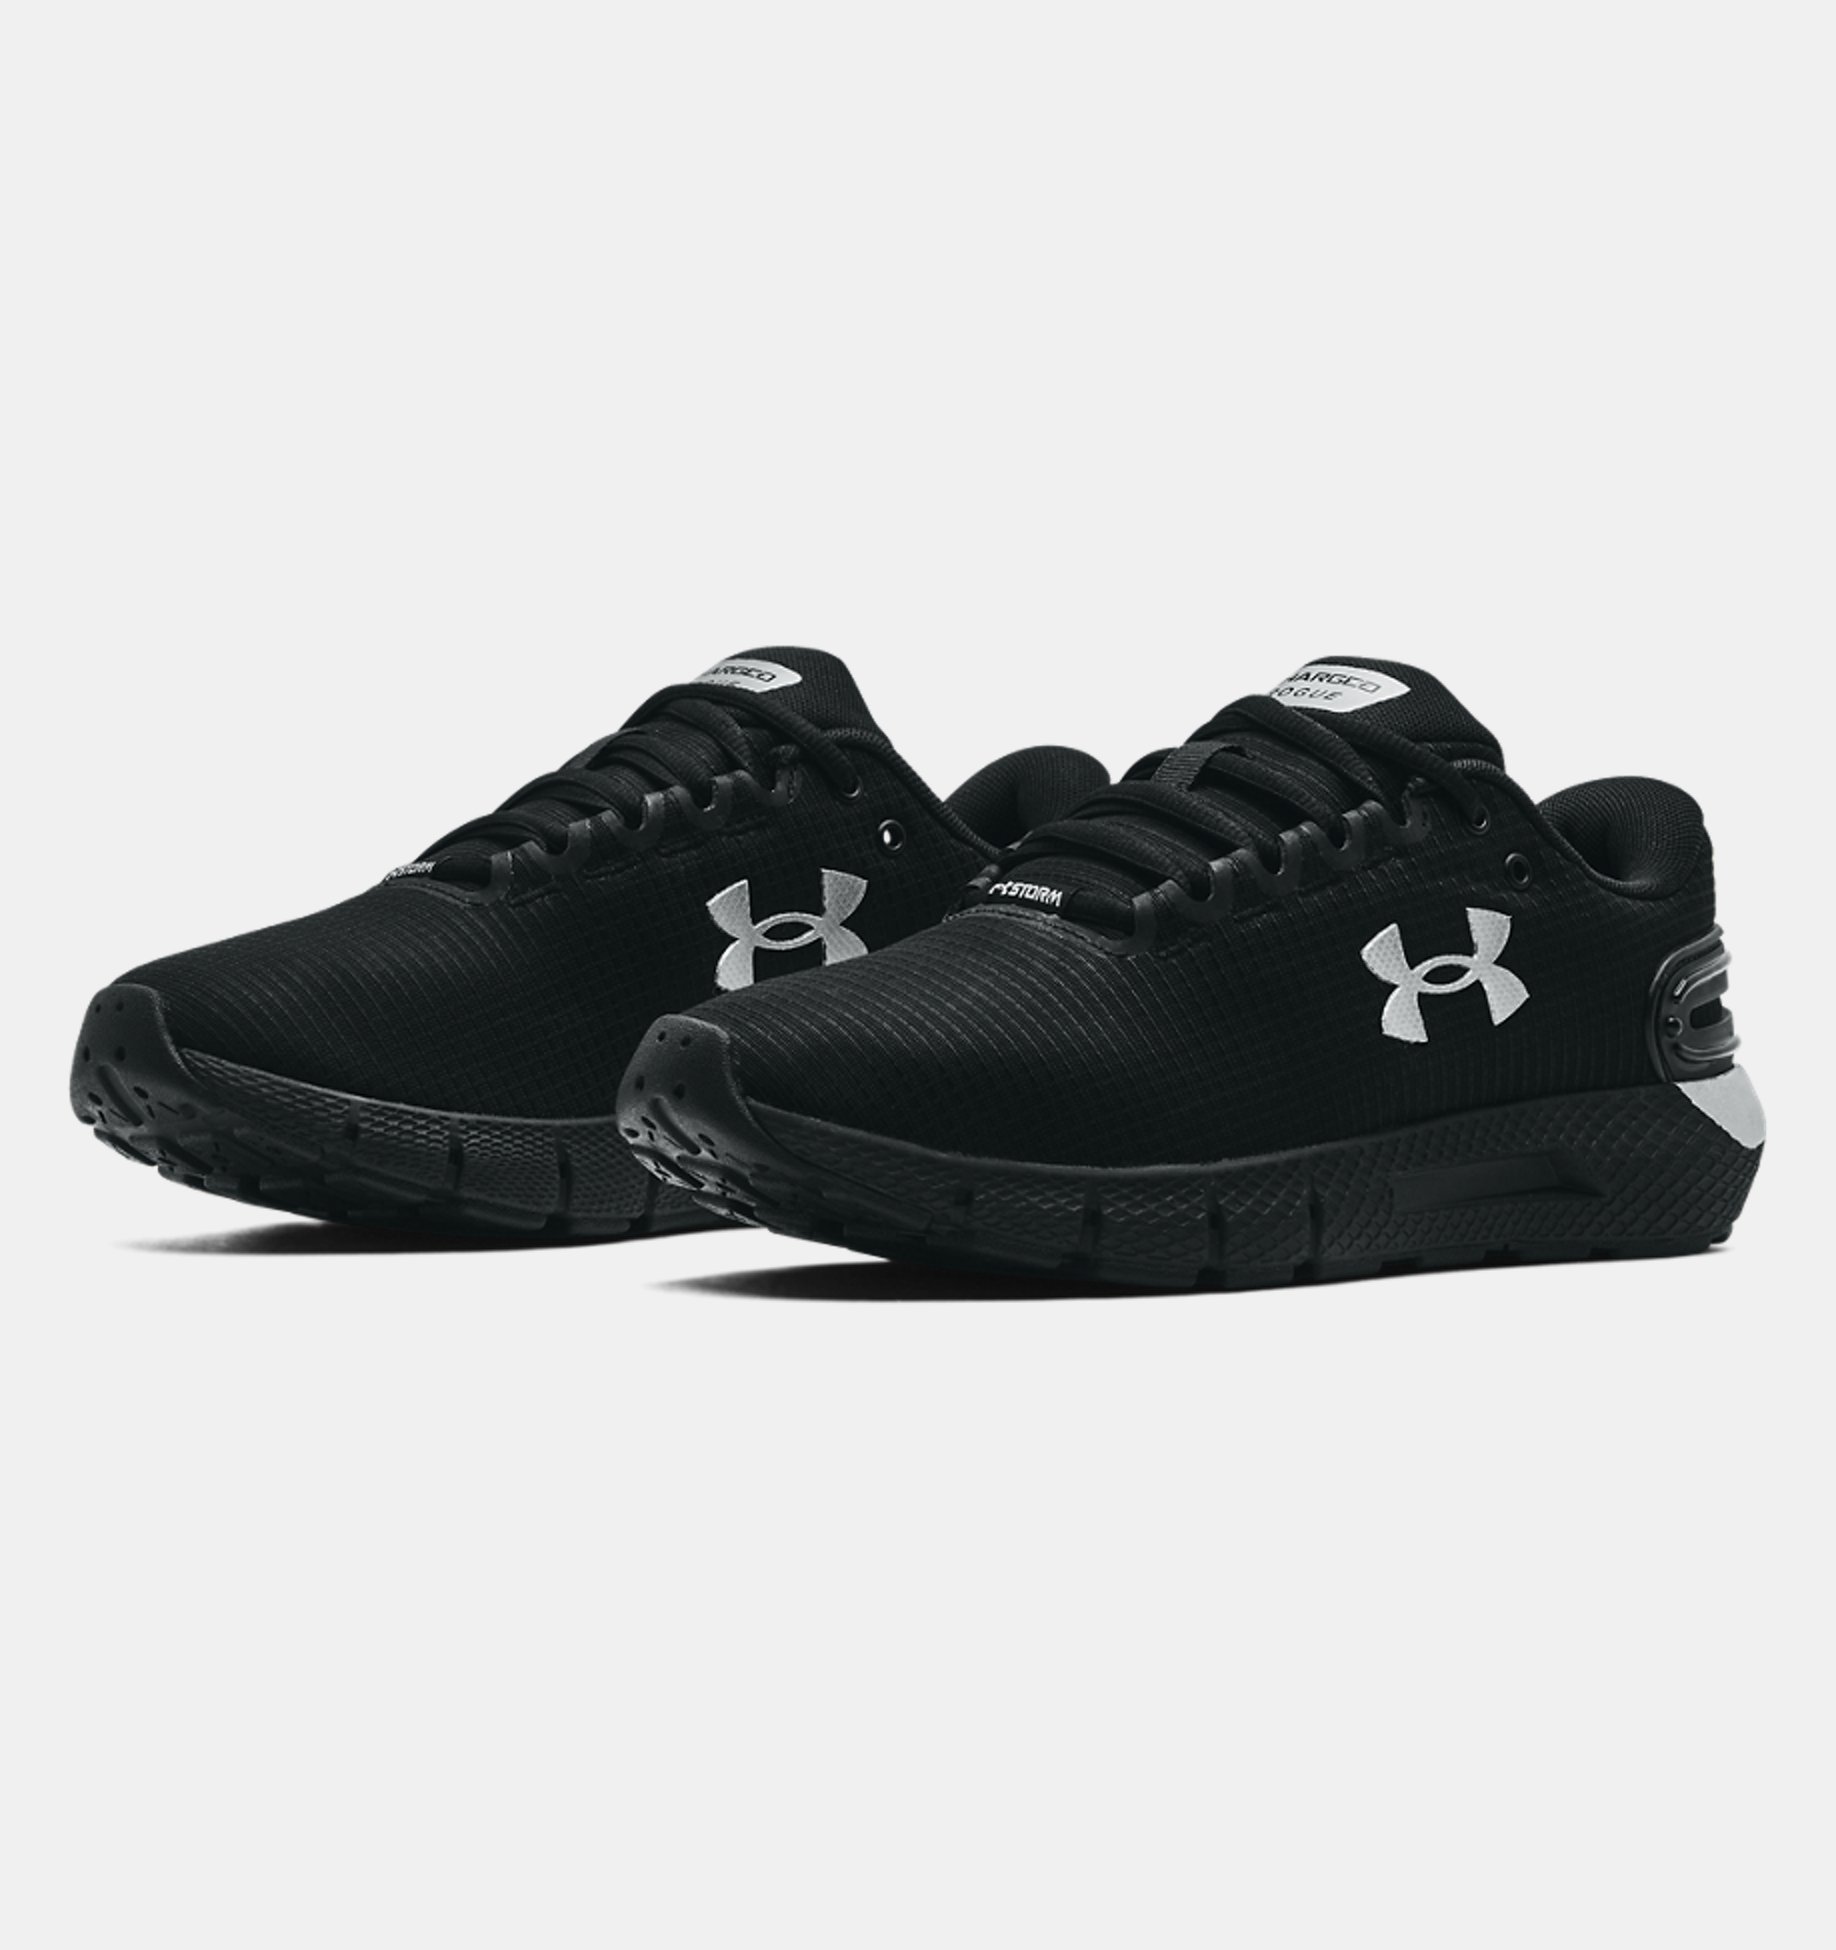 Under Armour Charged Rogue Storm Womens Running Shoes Black 